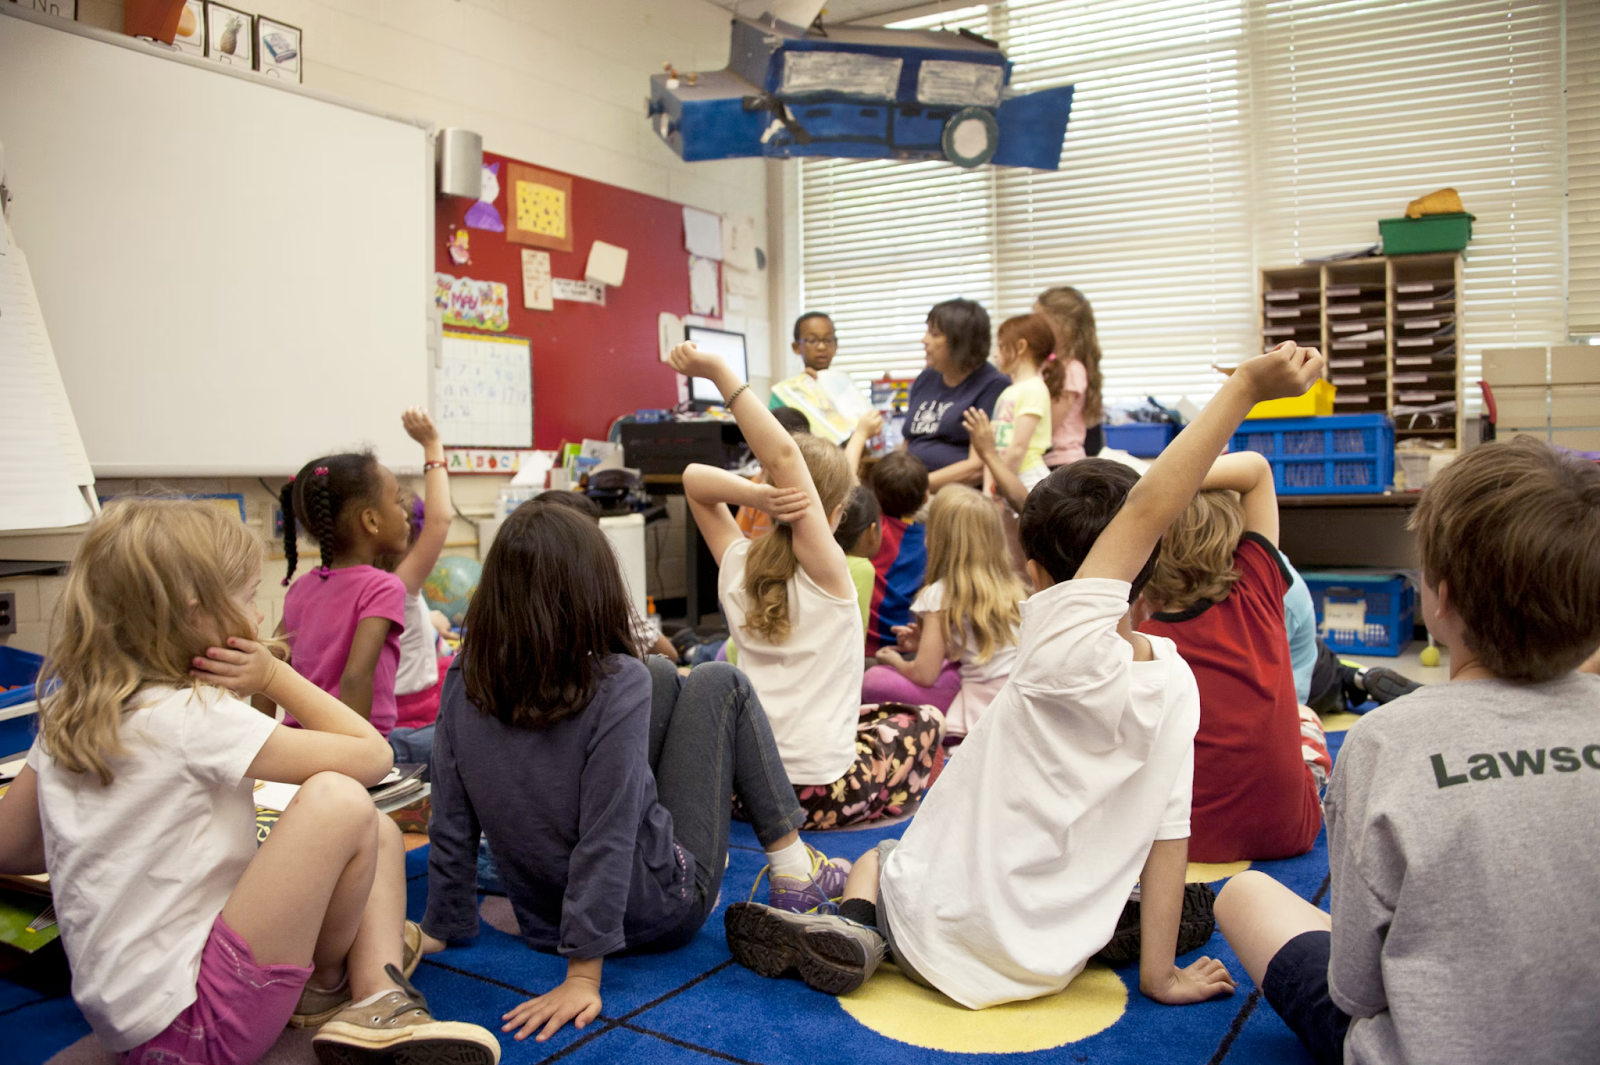 Children sitting together in a classroom. Some children have their hands up to participate.